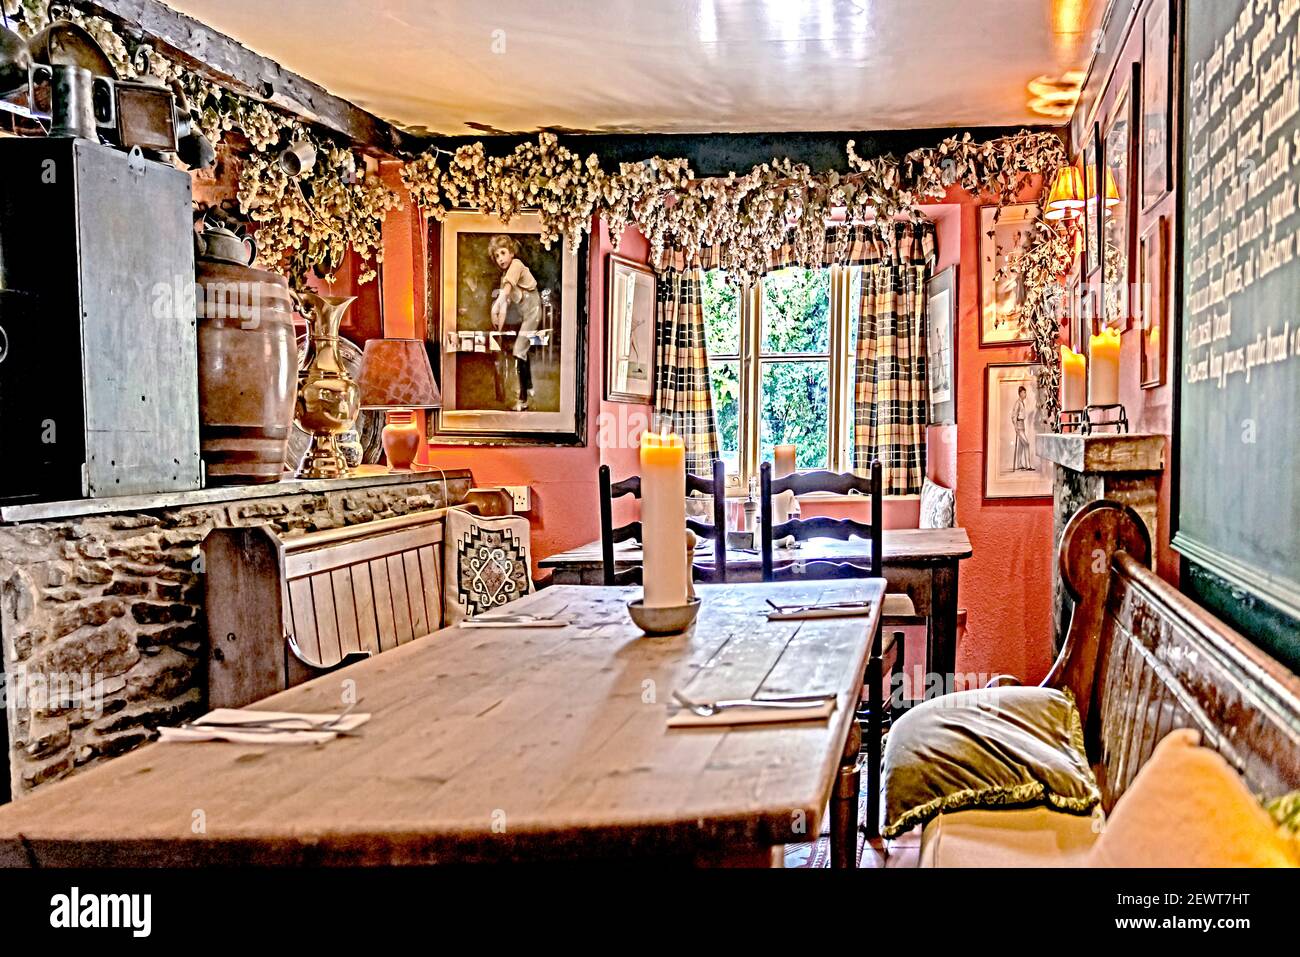 Blue Boar in Longworth, Oxfordshire, a traditional village pub, founded 1606 Stock Photo